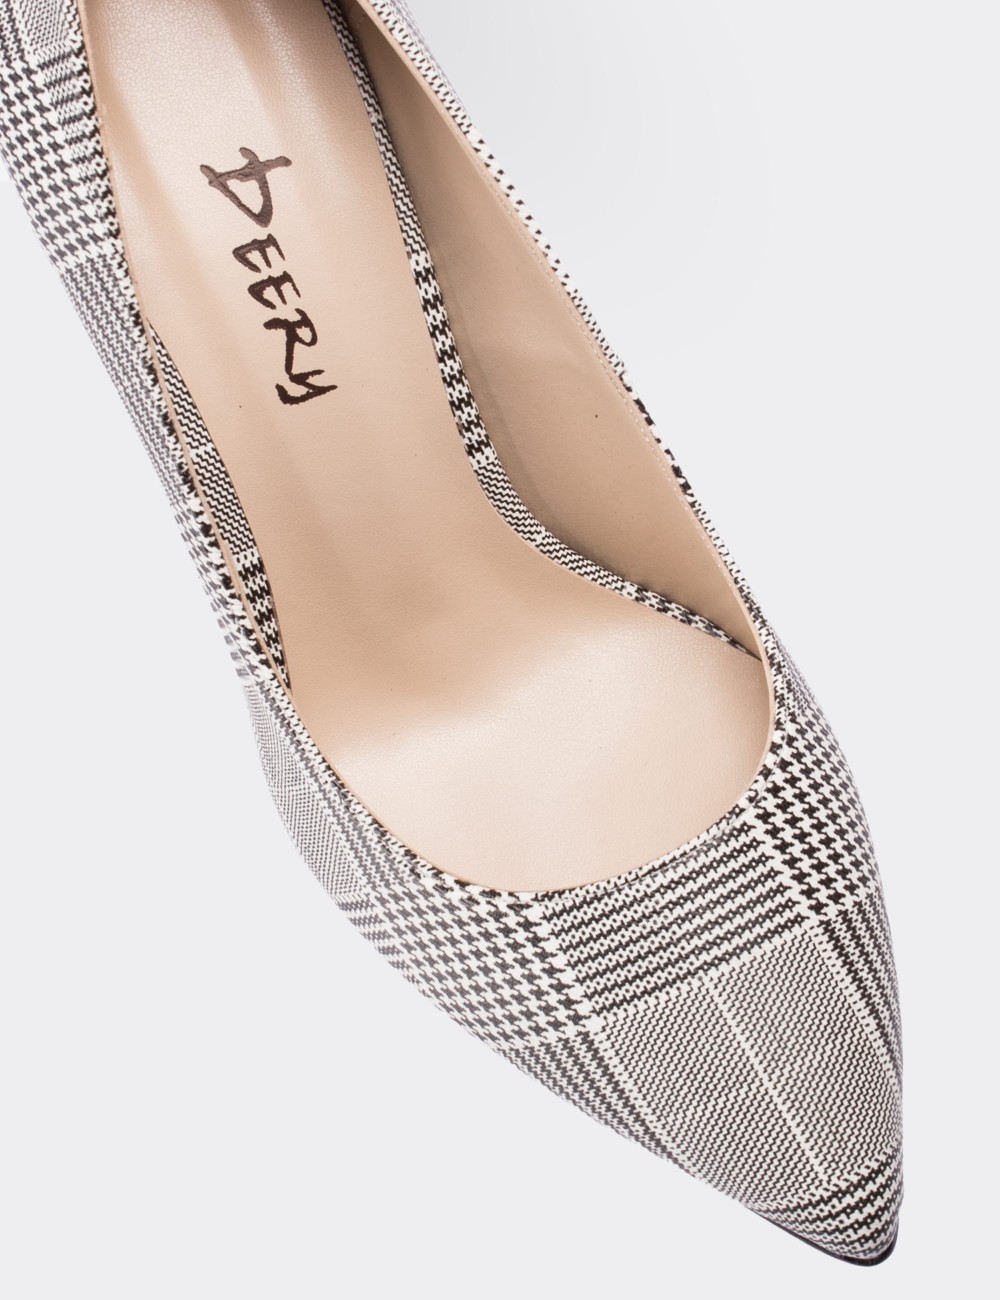 White Leather Pumps - 02029ZBYZM02